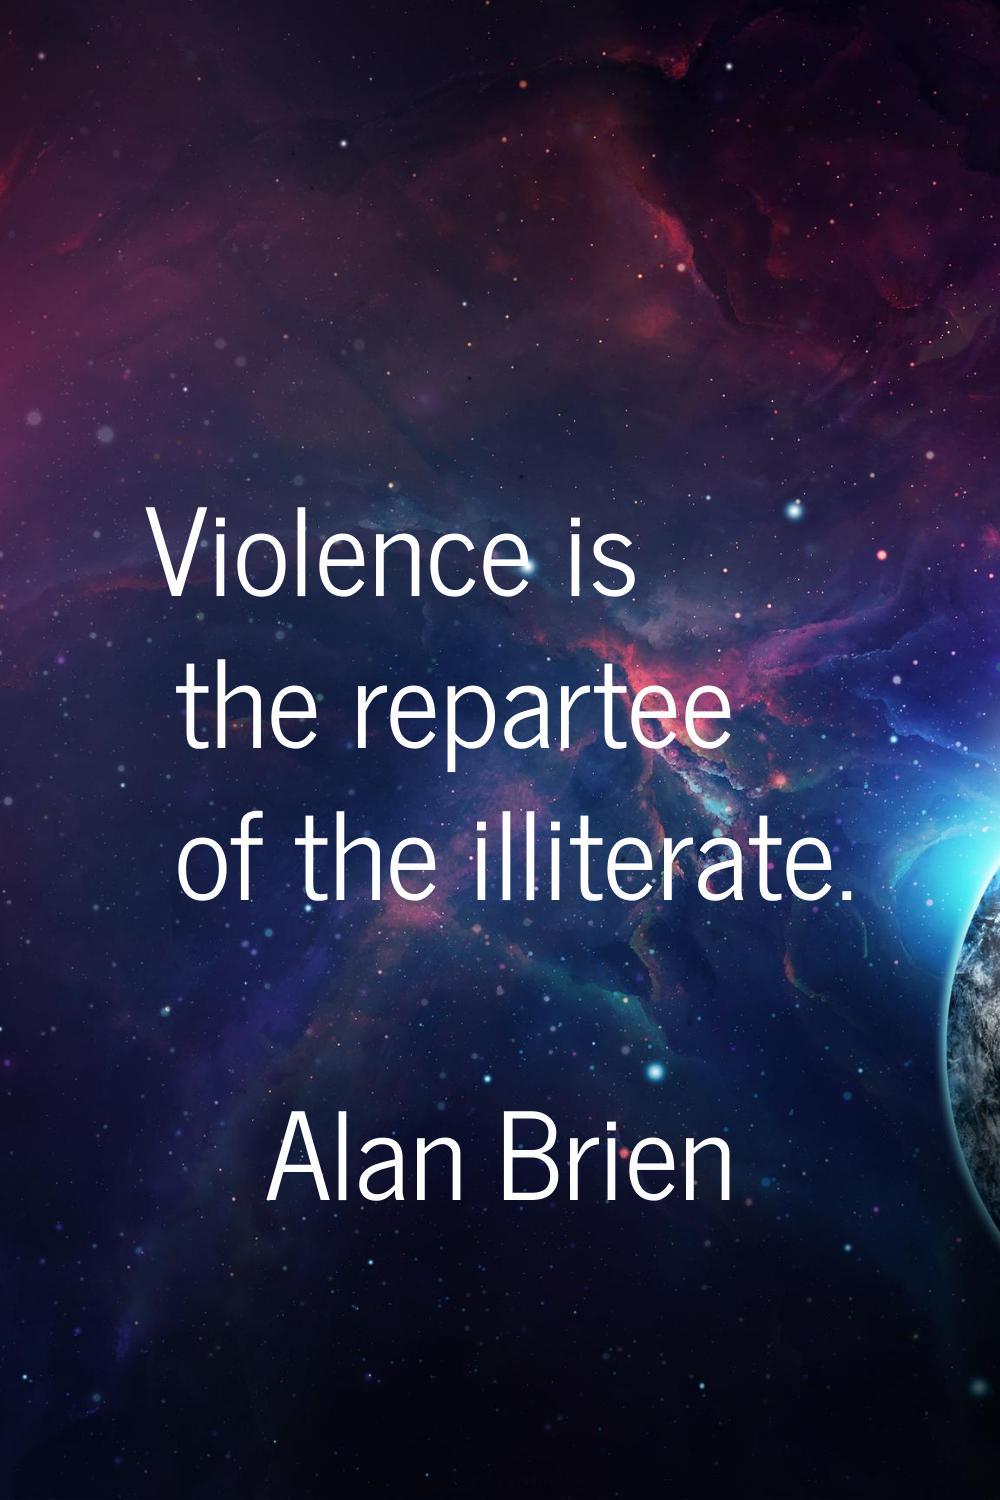 Violence is the repartee of the illiterate.